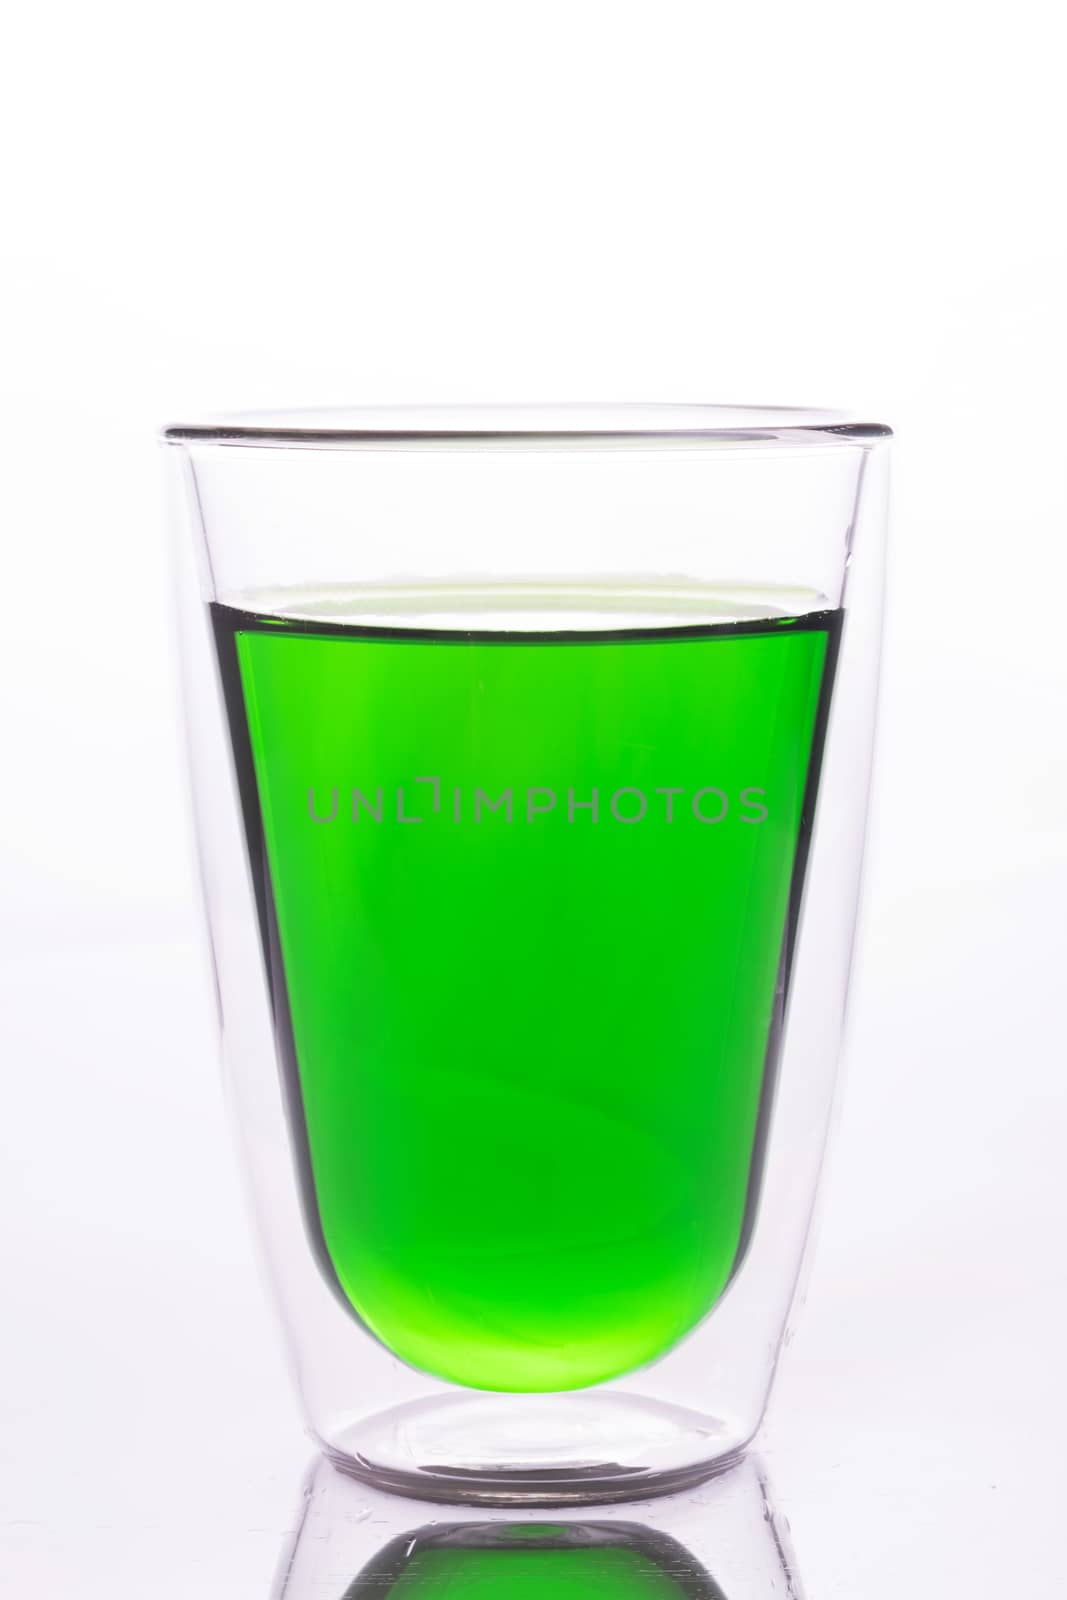 Glass of green water, look like a vegetable juice, soft drink